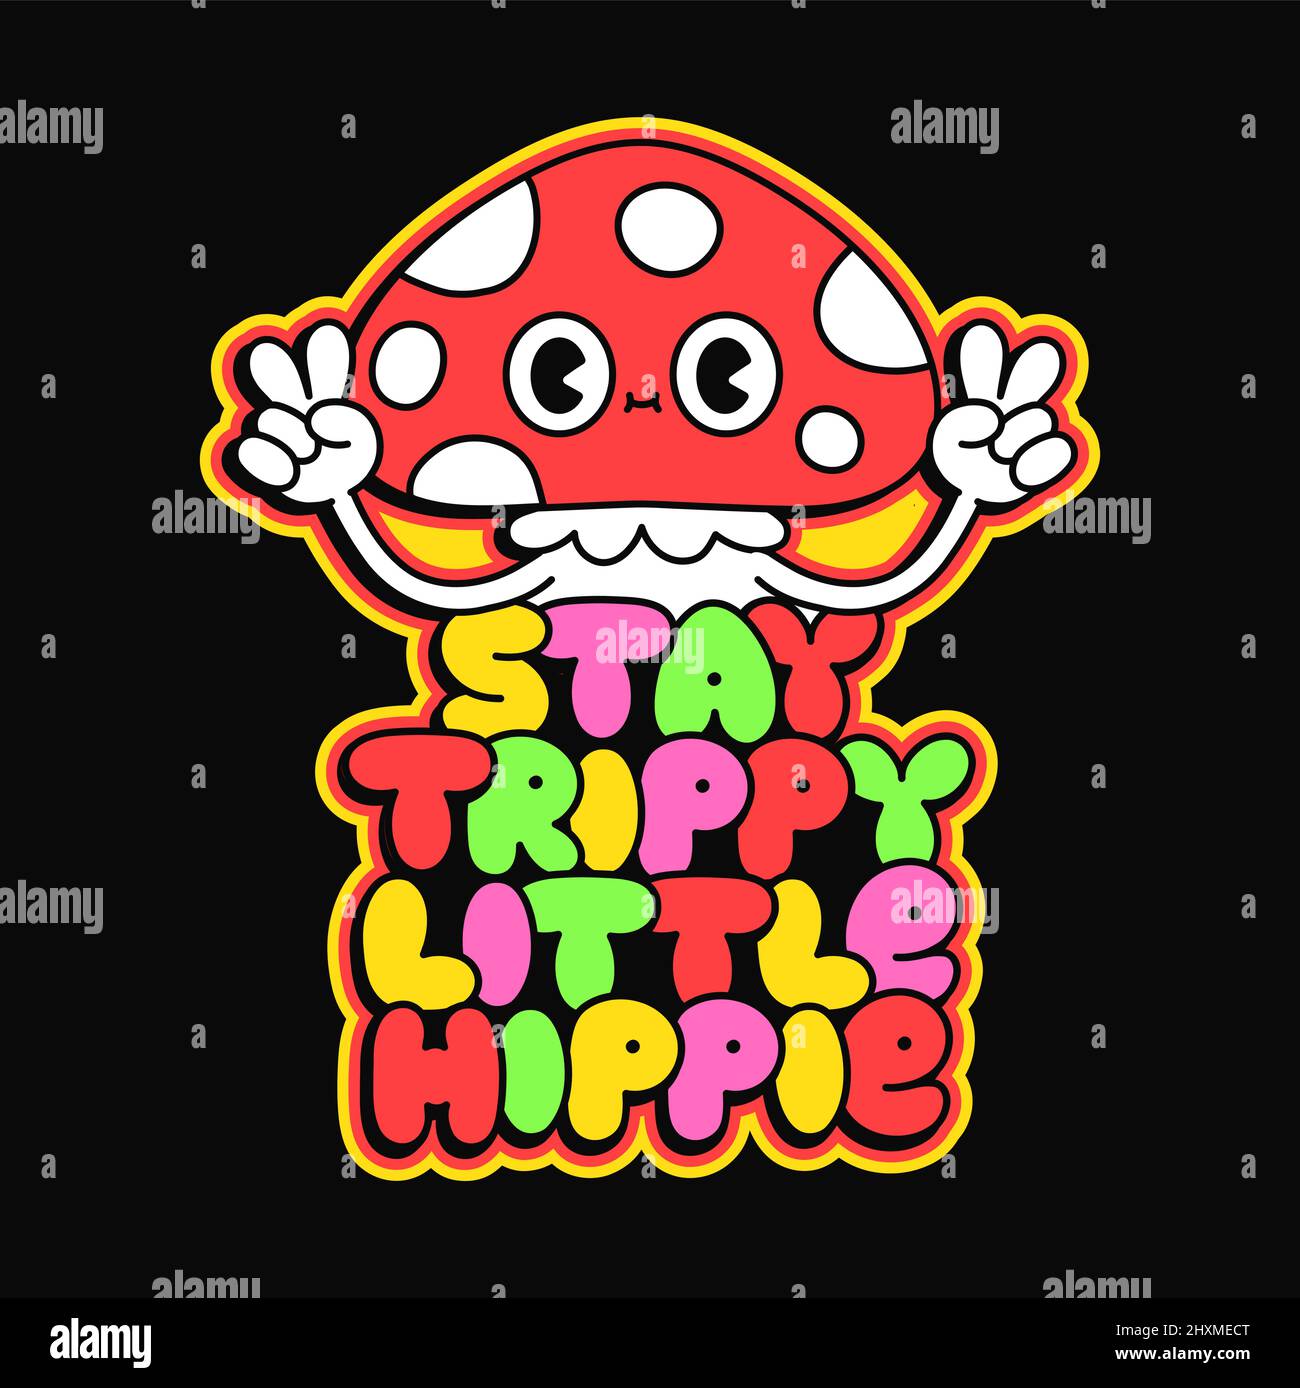 Funny psychedelic amanita mushroom show peace gesture sign. Stay trippy little hippie slogan.Vector doodle line cartoon kawaii character illustration.Magic 70s trippy mushroom print on poster, t-shirt Stock Vector